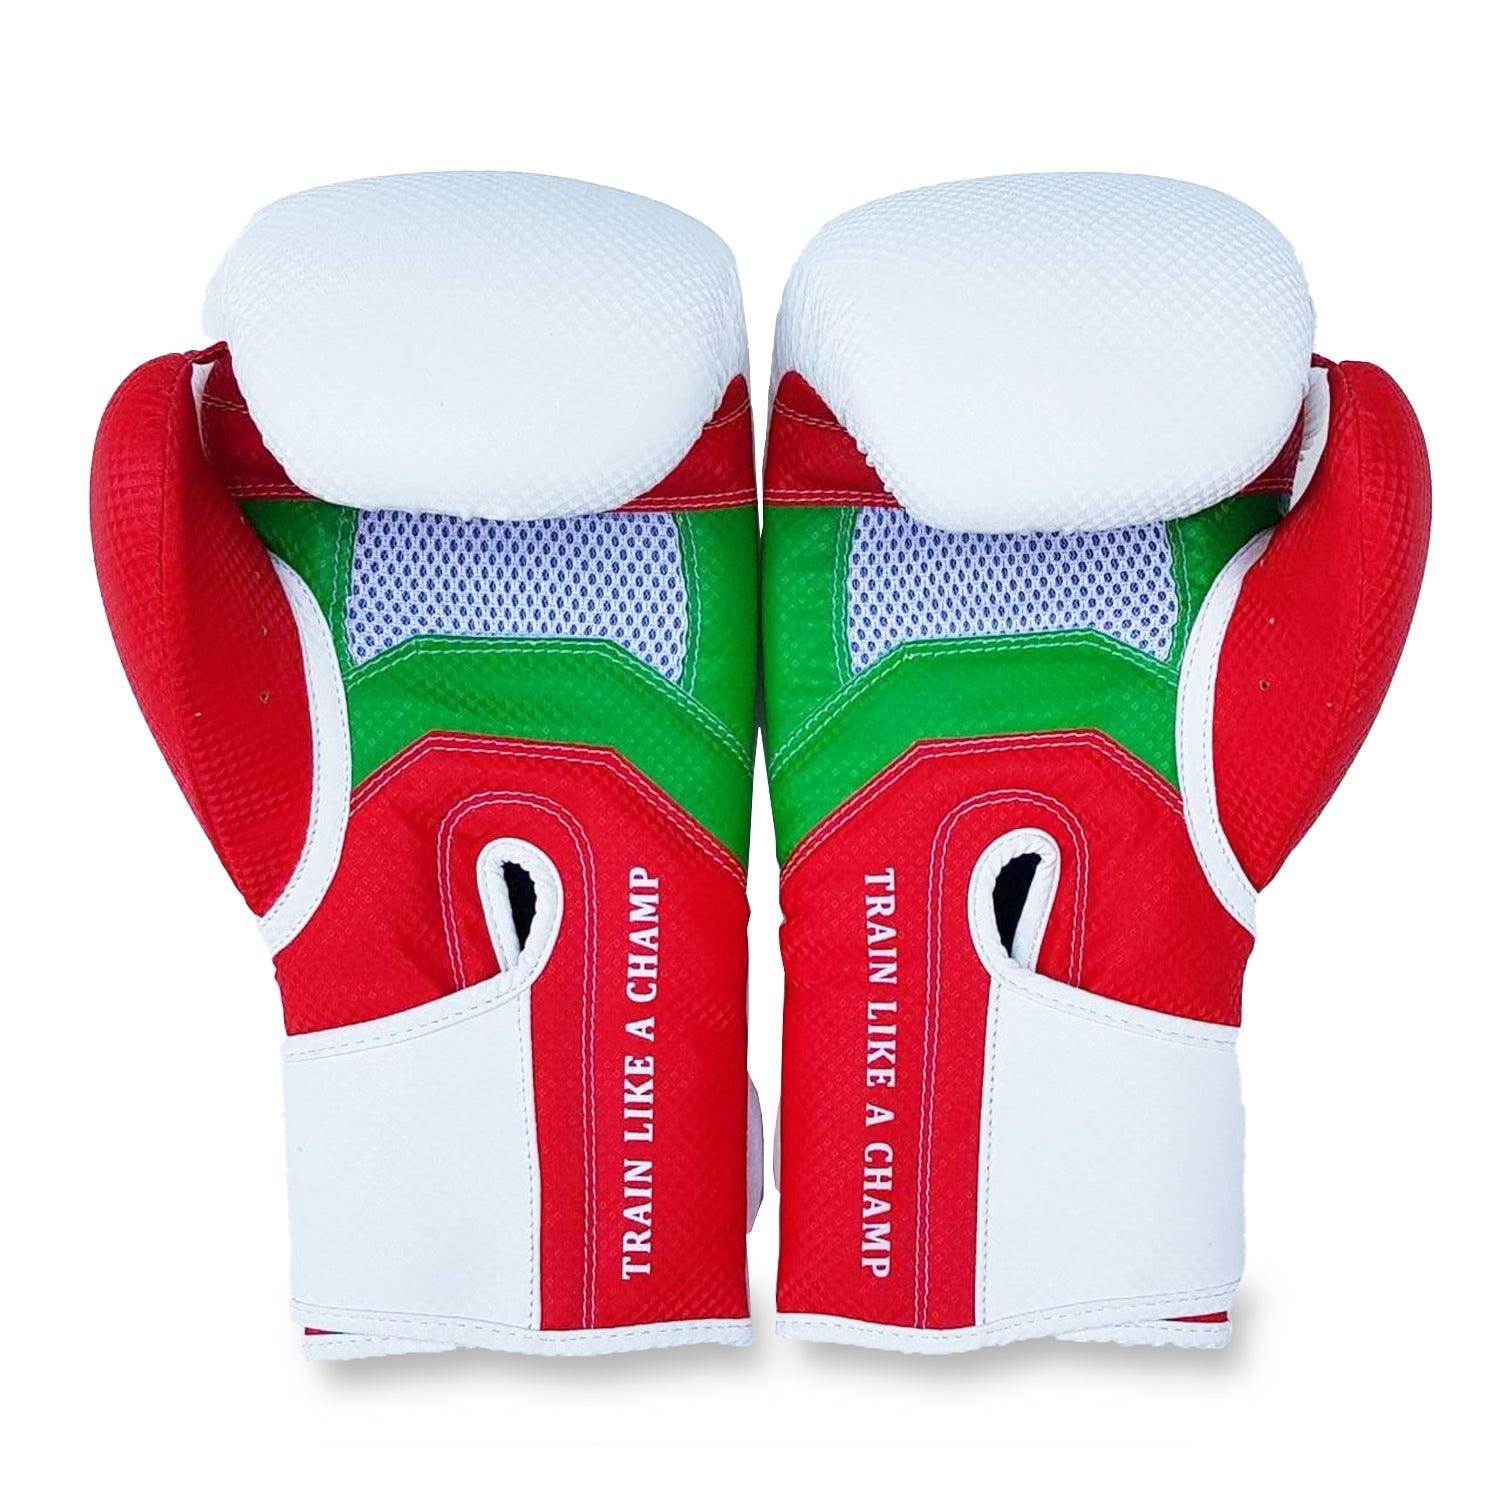 RingMaster Sports Special Edition Boxing Gloves Wales Image 2